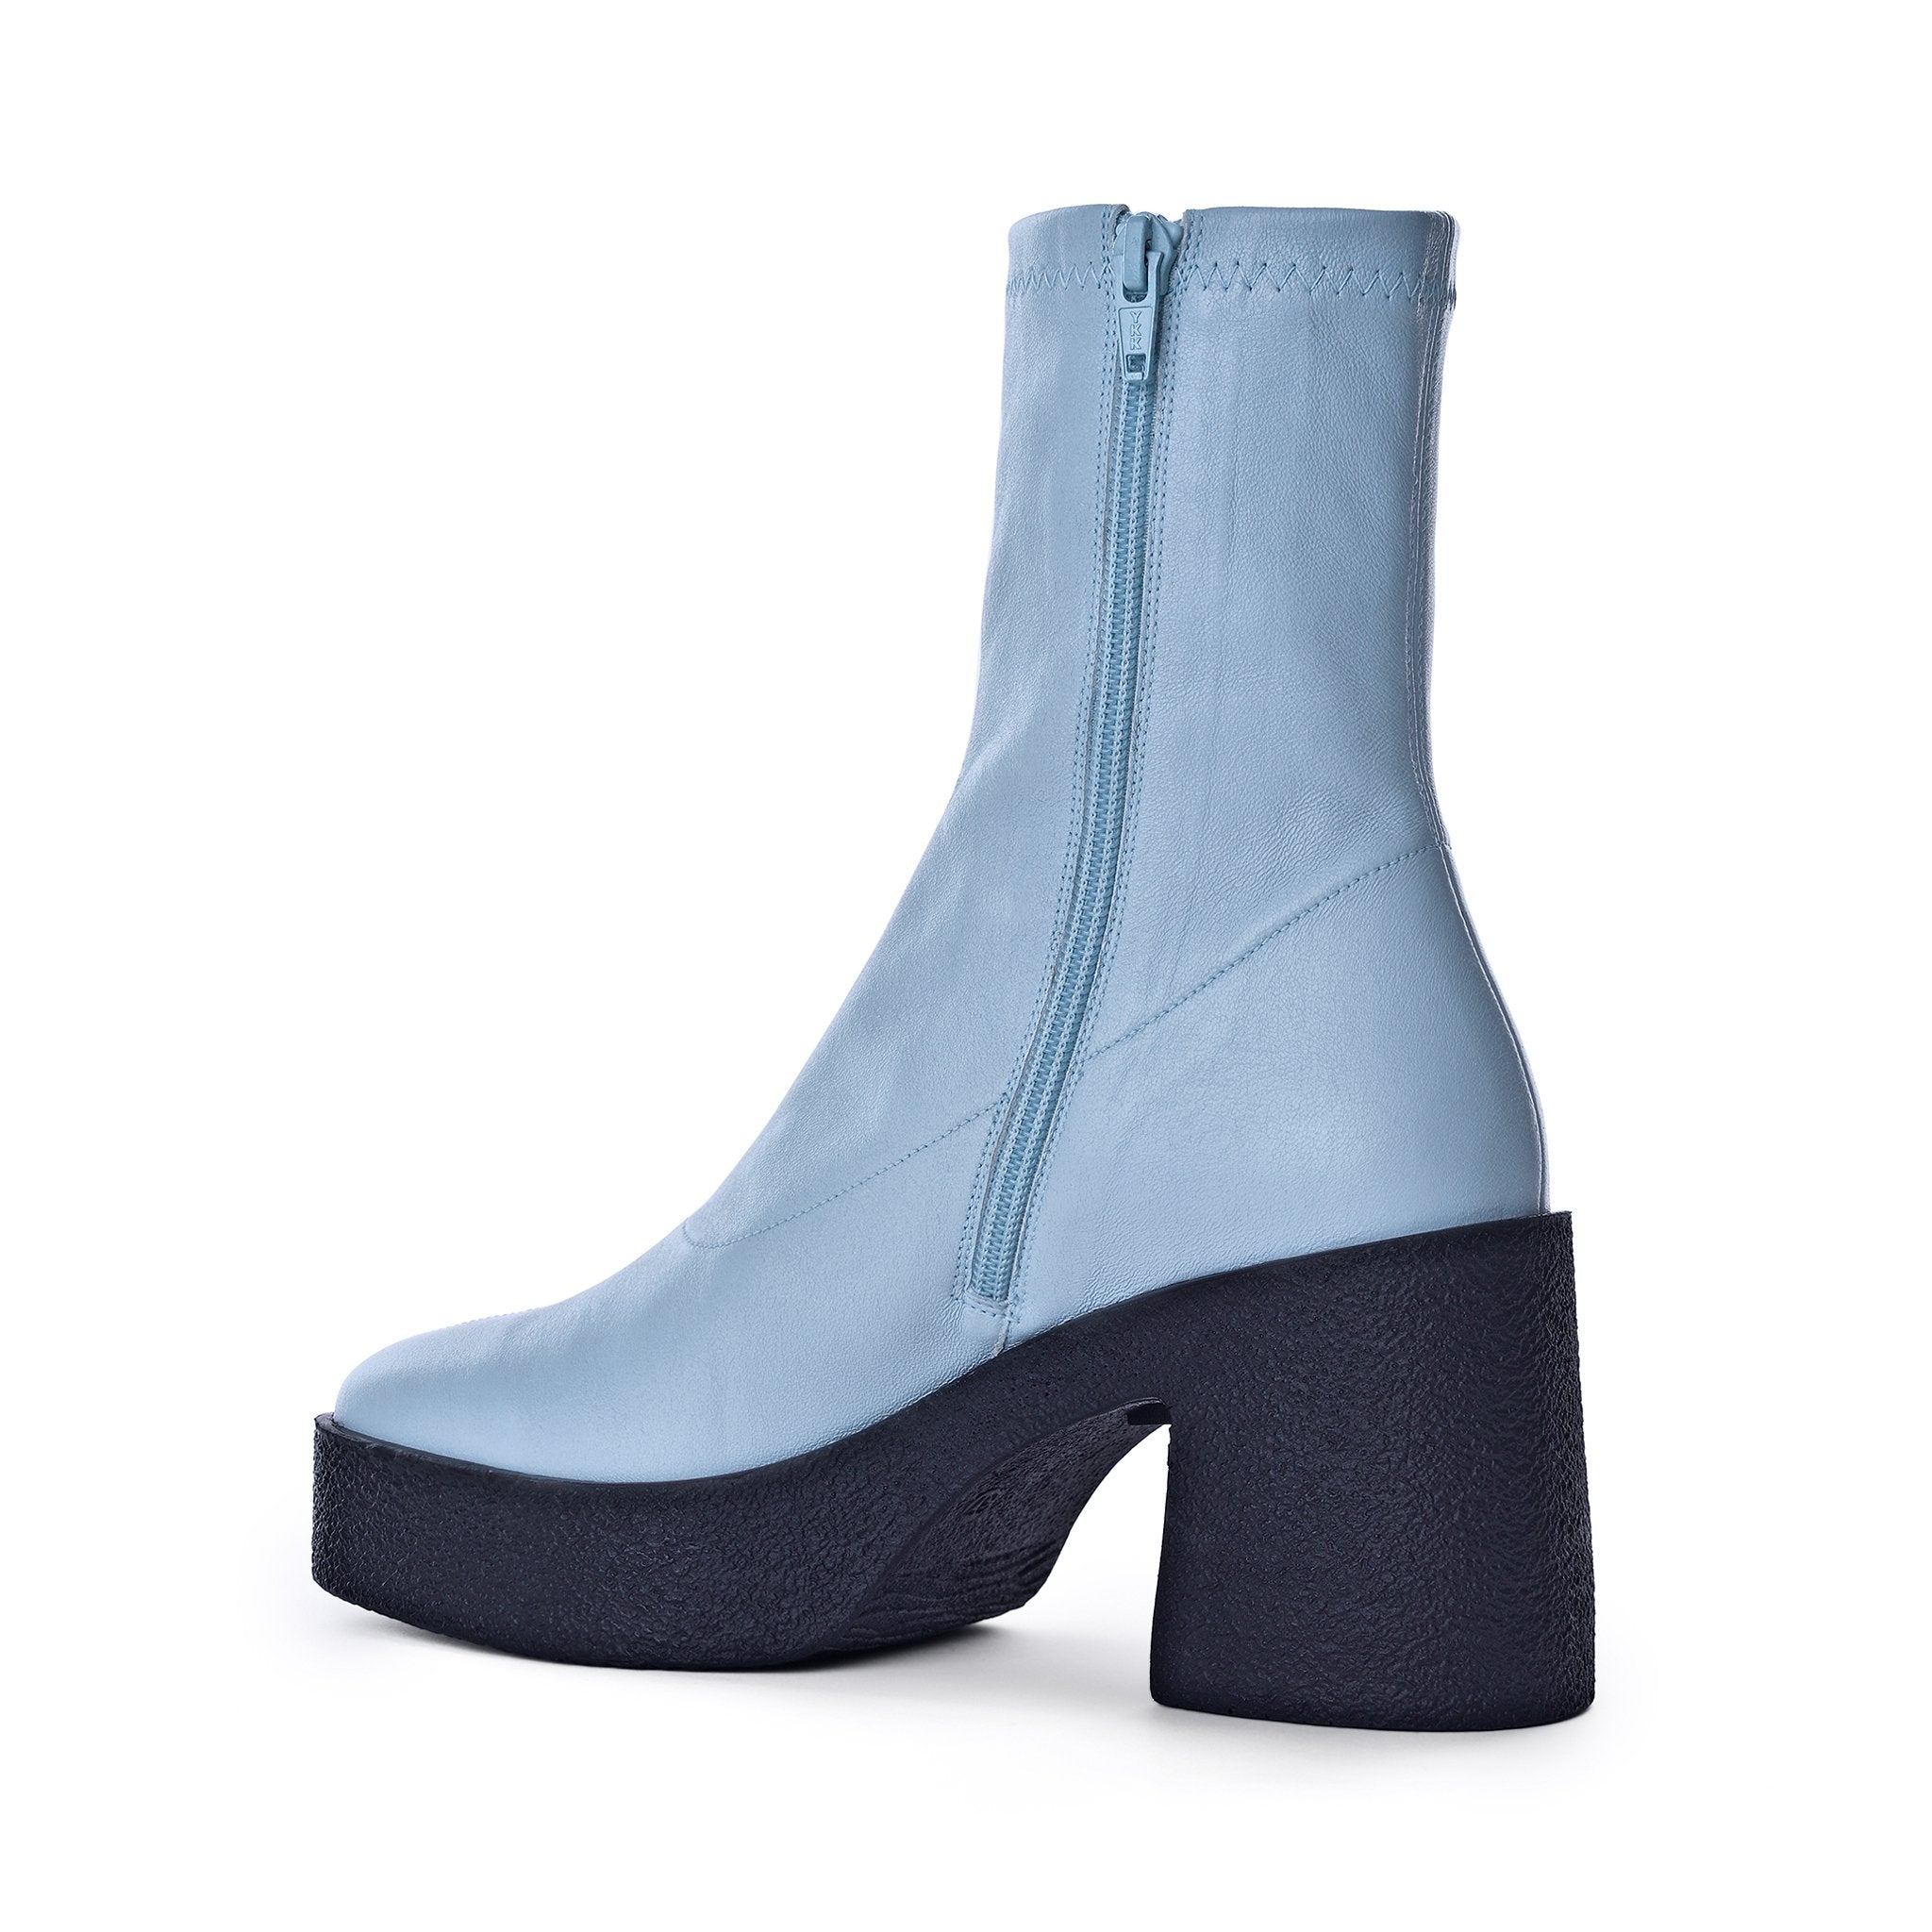 Umi Pastel Blue Stretch Leather Chunky Ankle Boots 20077-02-07 - 6